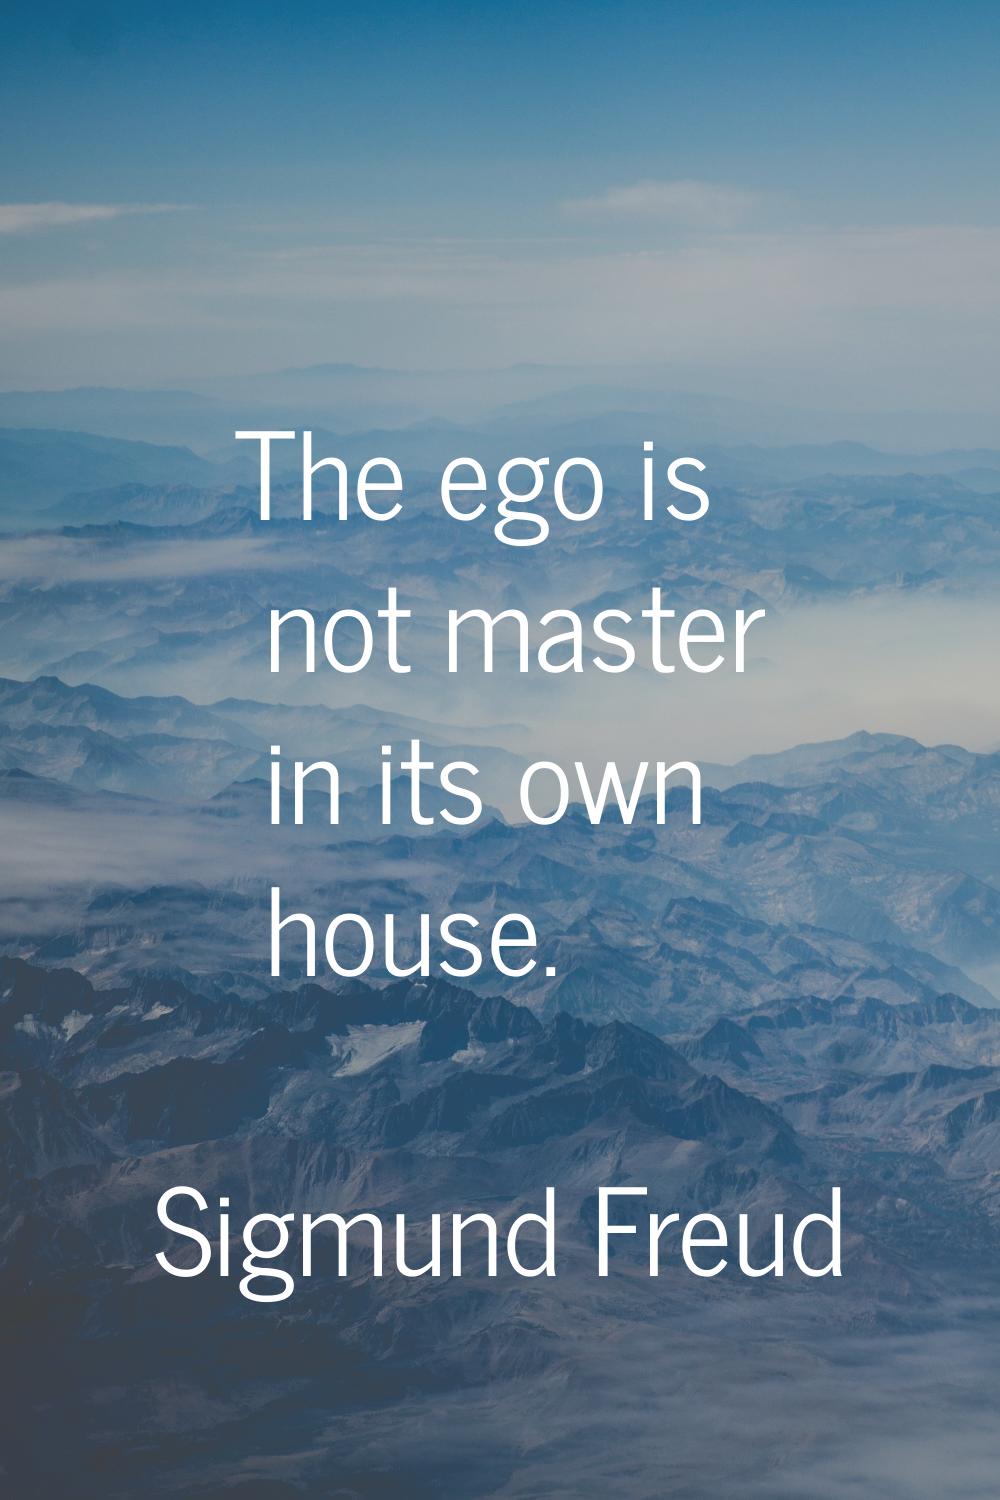 The ego is not master in its own house.